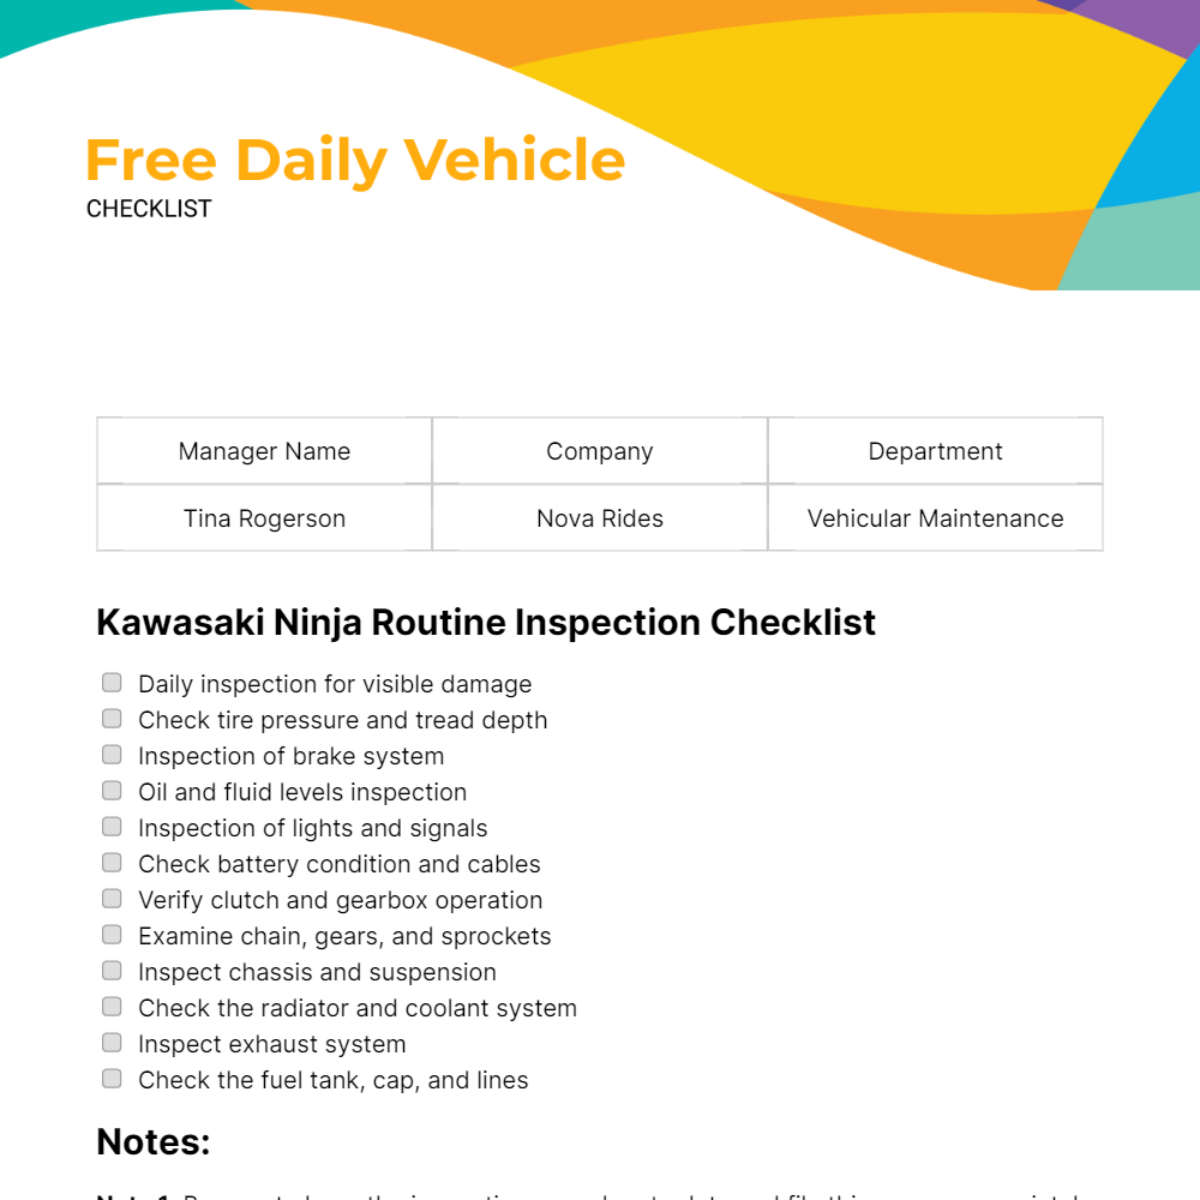 Free Daily Vehicle Checklist Template